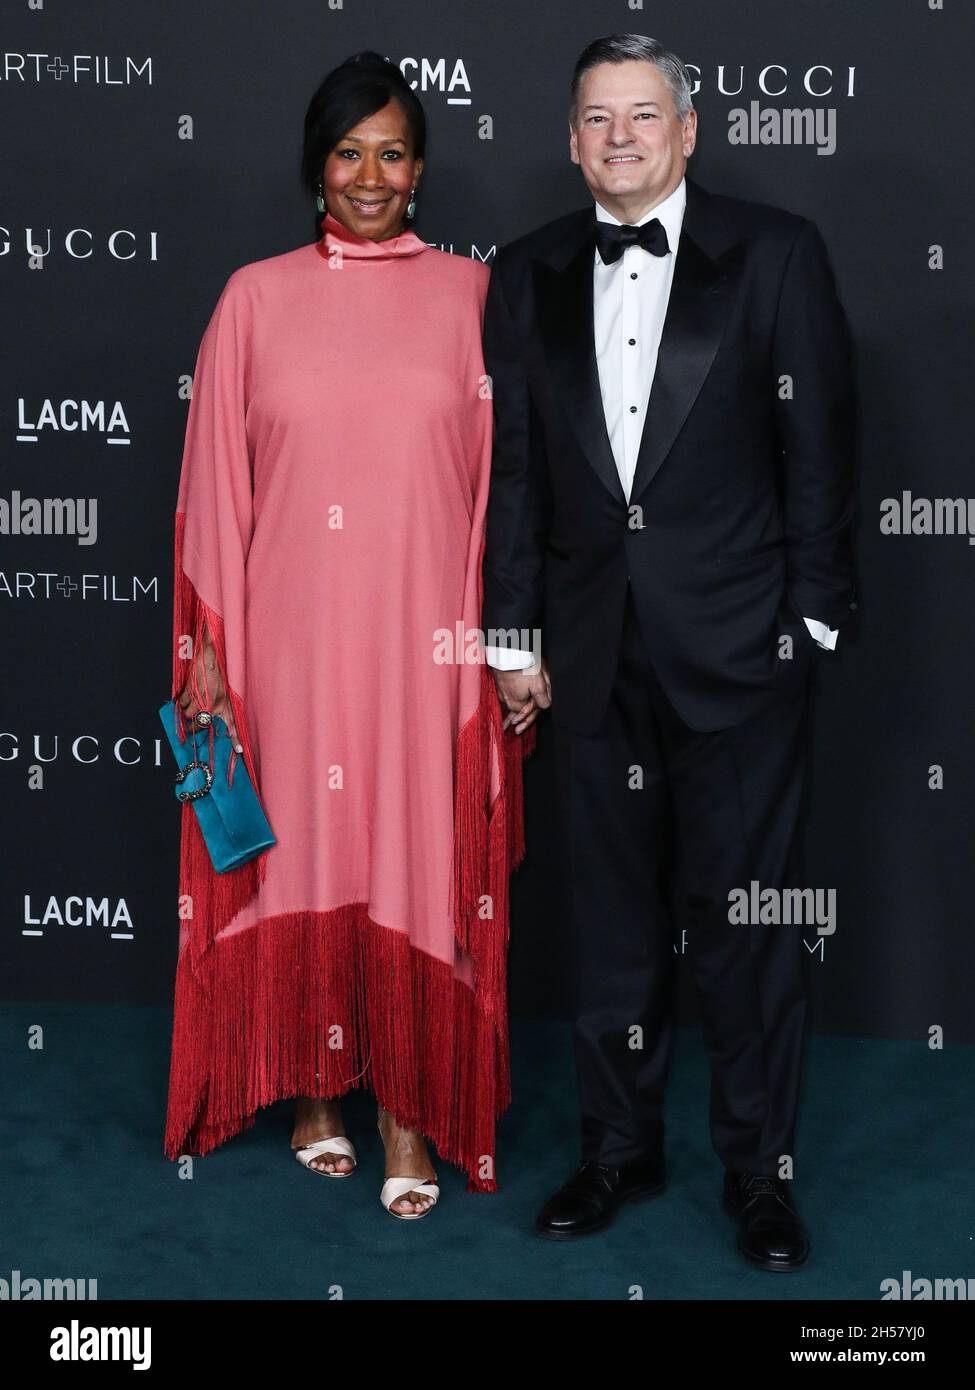 Los Angeles, United States. 06th Nov, 2021. LOS ANGELES, CALIFORNIA, USA - NOVEMBER 06: Nicole Avant and husband/Co-CEO and Chief Content Officer at Netflix Ted Sarandos arrive at the 10th Annual LACMA Art   Film Gala 2021 held at the Los Angeles County Museum of Art on November 6, 2021 in Los Angeles, California, United States. (Photo by Xavier Collin/Image Press Agency/Sipa USA) Credit: Sipa USA/Alamy Live News Stock Photo